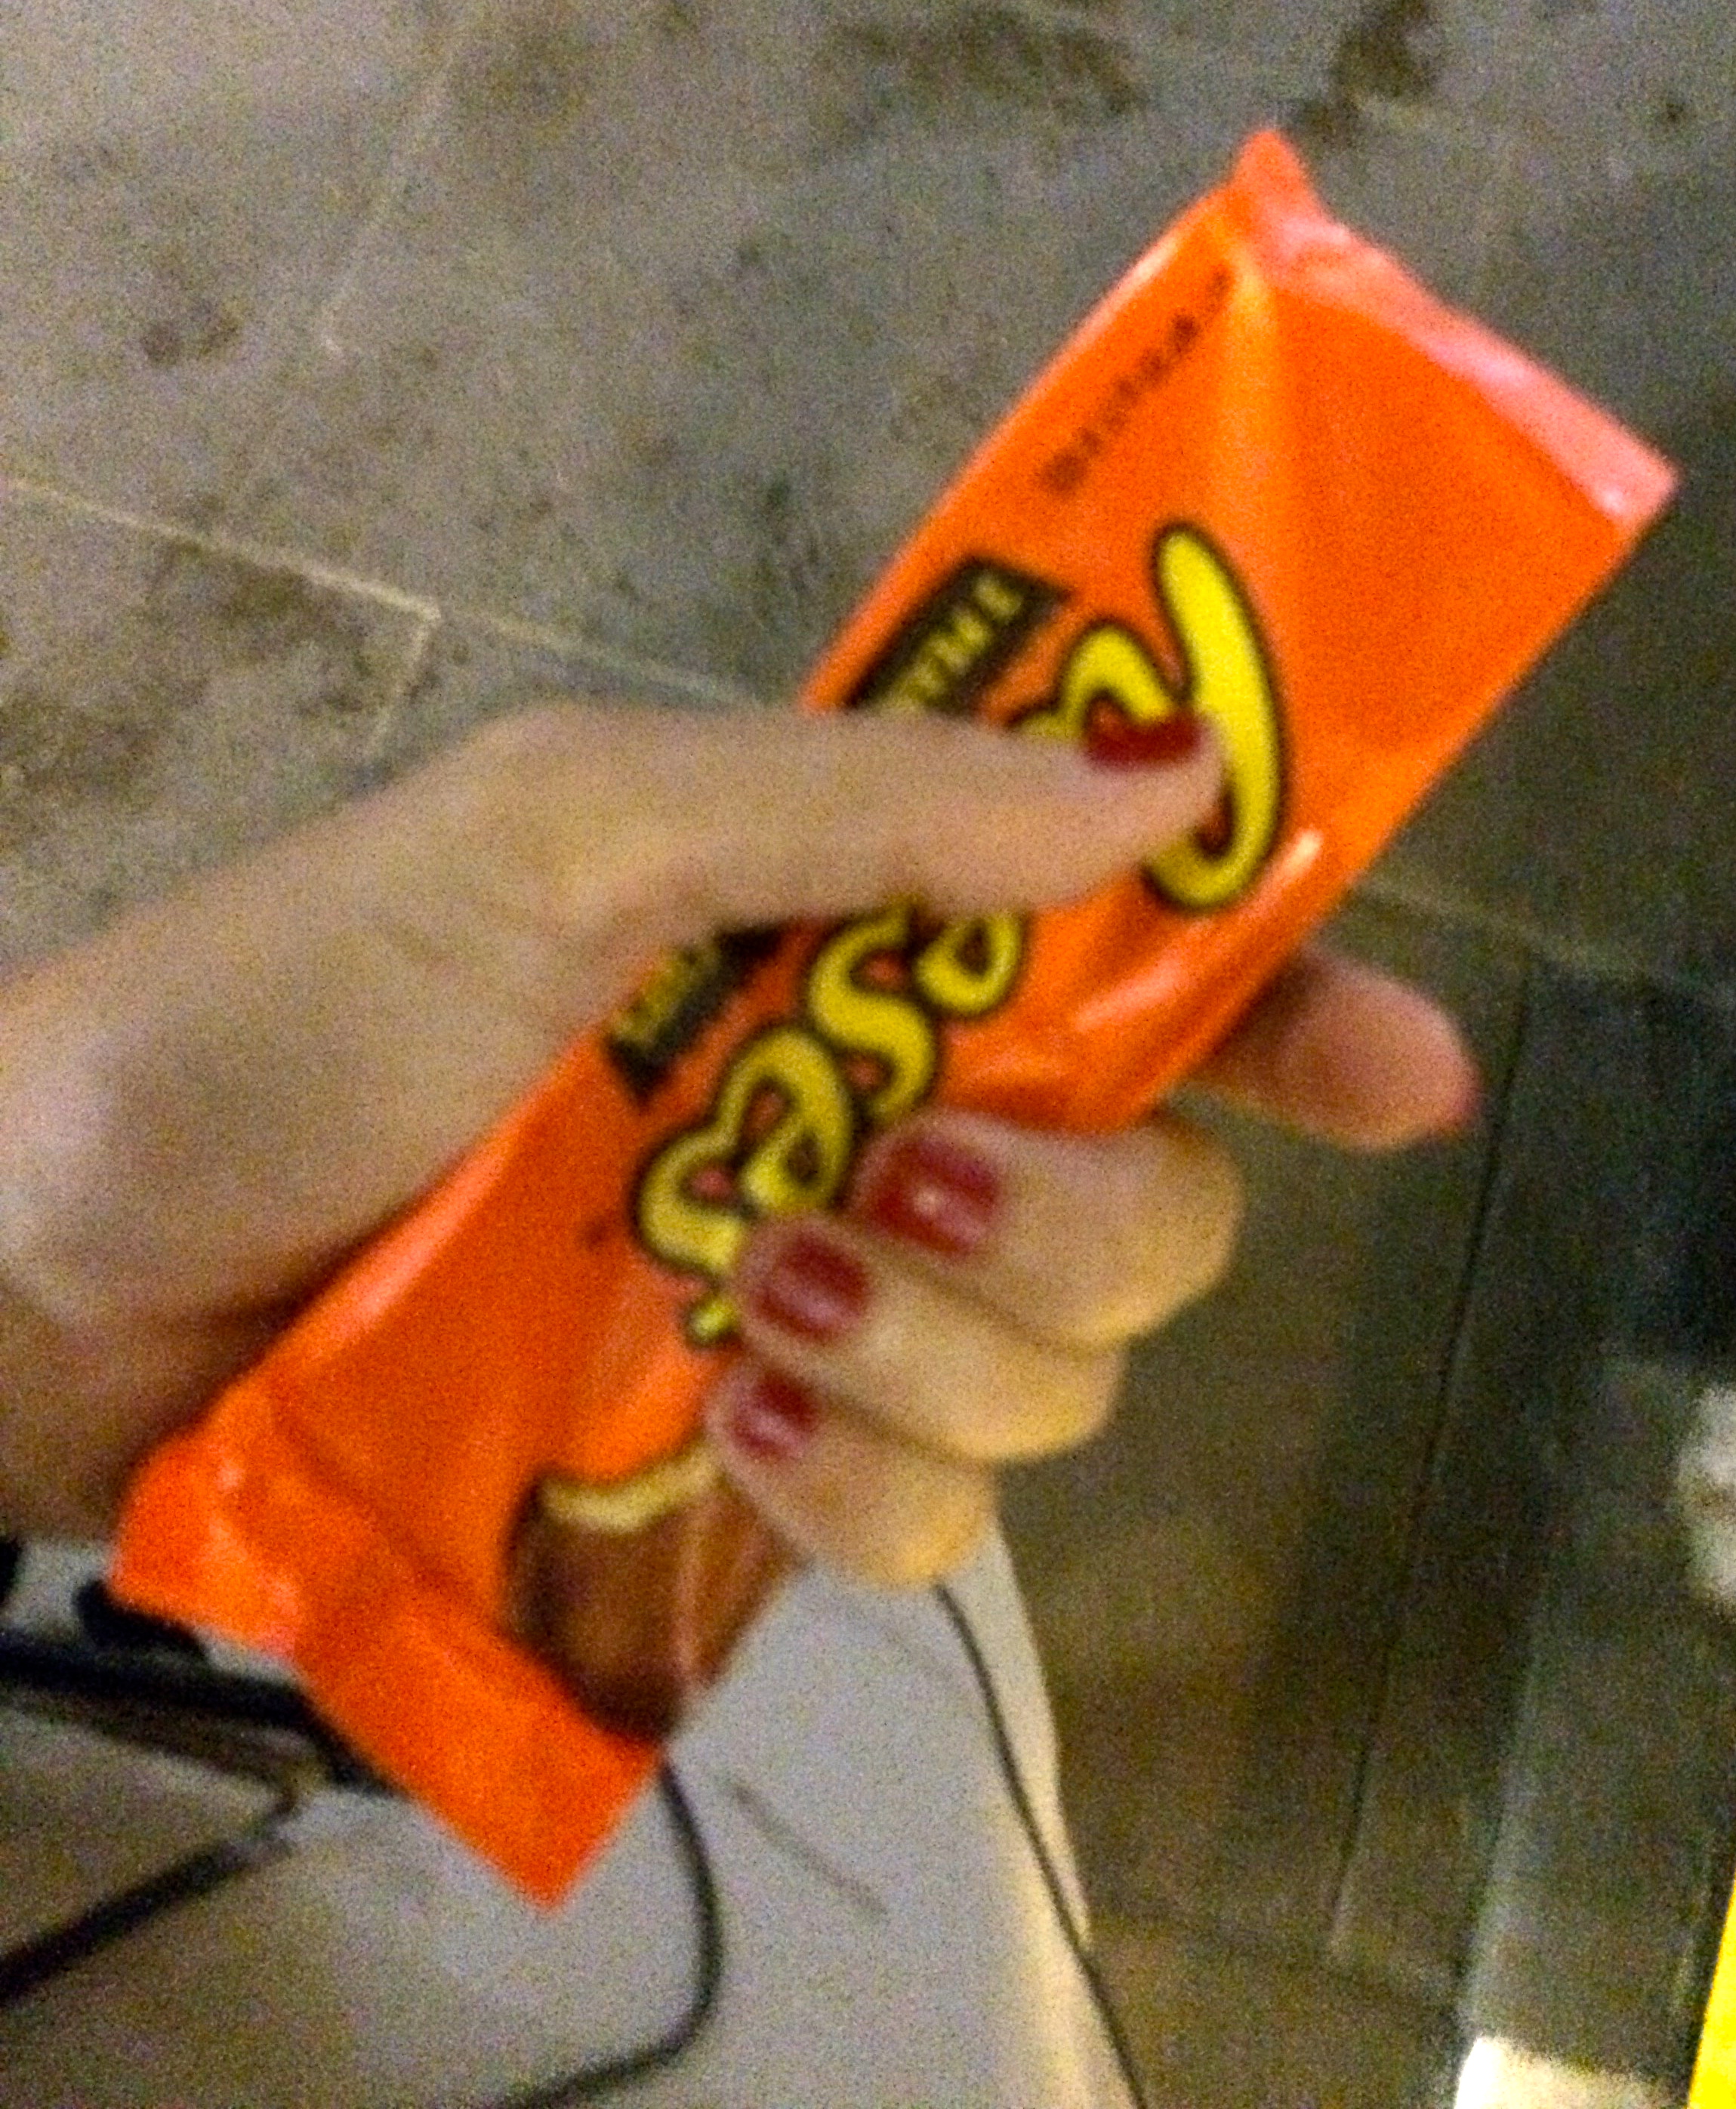 to get rid of the night's buzz, my favorite: reese's peanut butter cups. i devoured all three with a curious passion